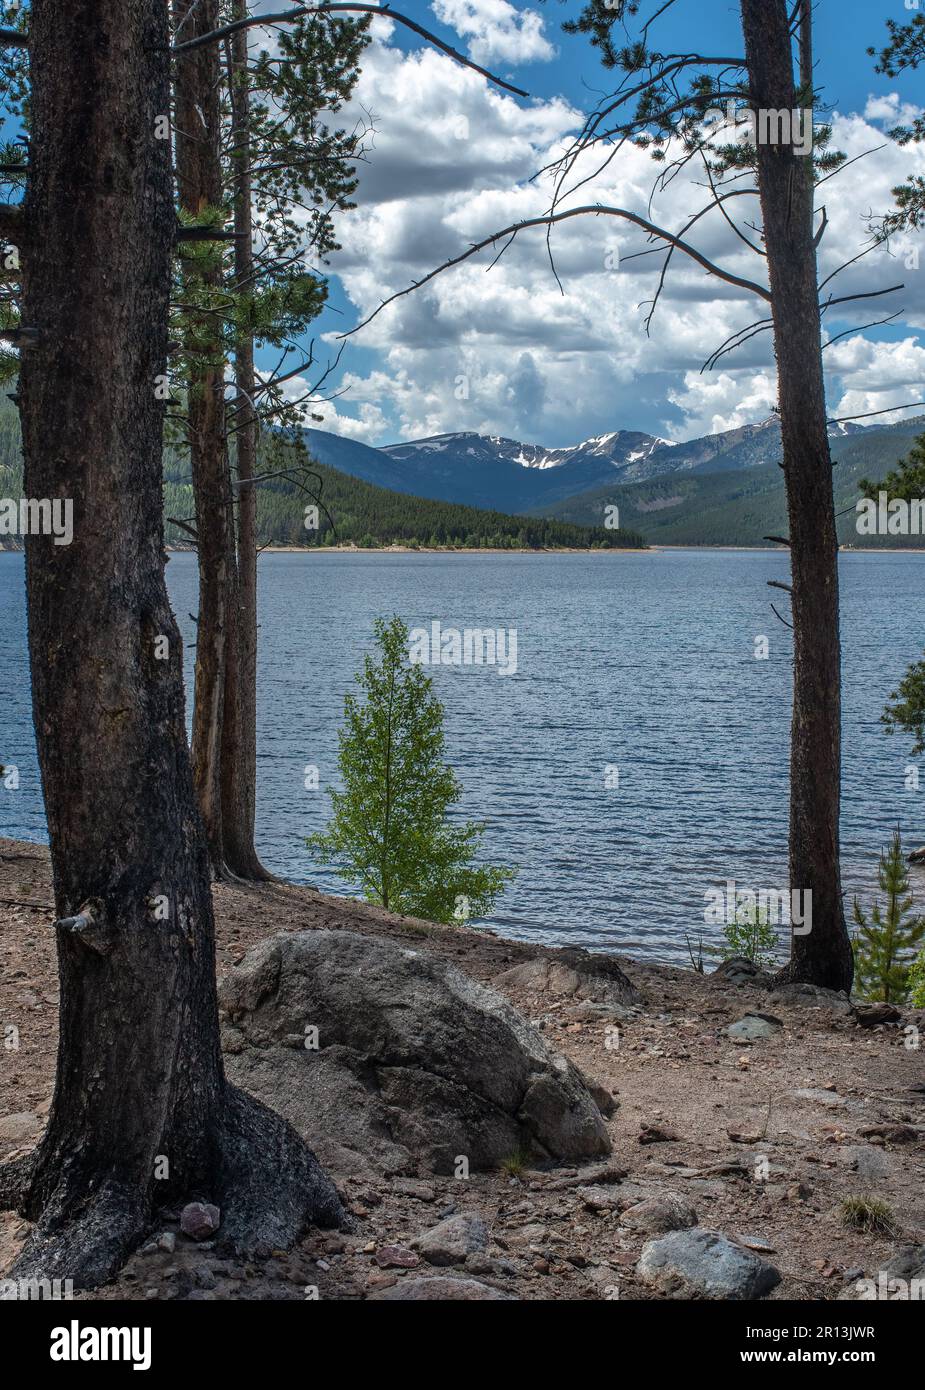 A beautiful view across Turquoise Lake near Leadville, Colorado on a mid-summer day. Stock Photo